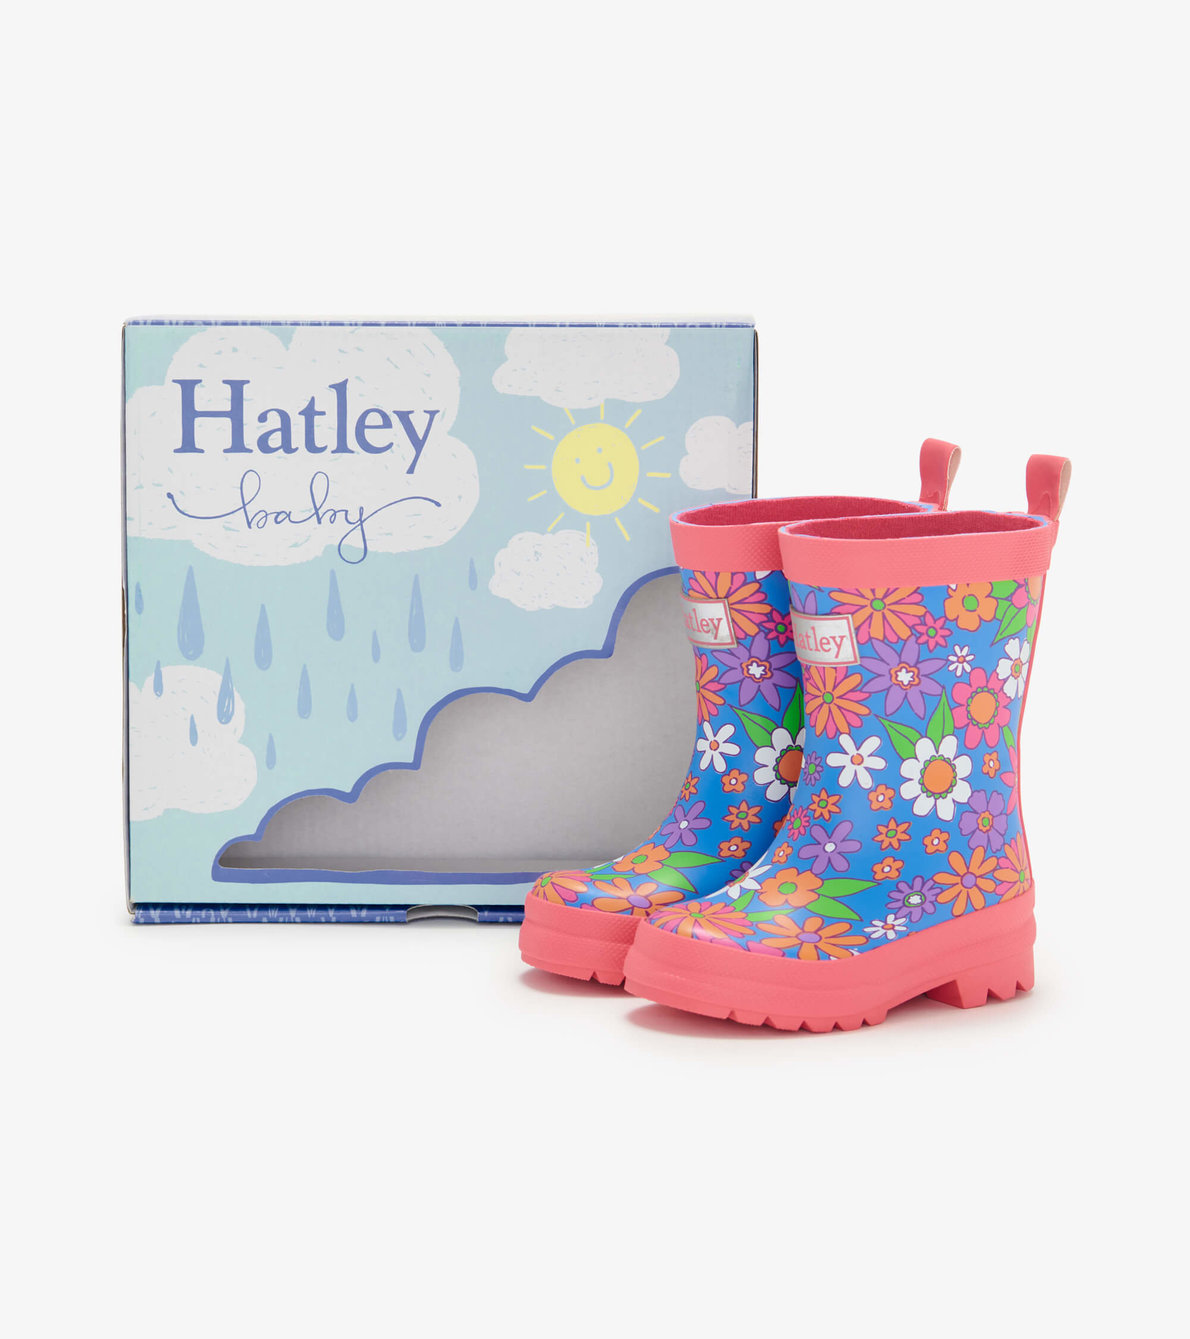 View larger image of My 1st Rain Boots - Retro Floral